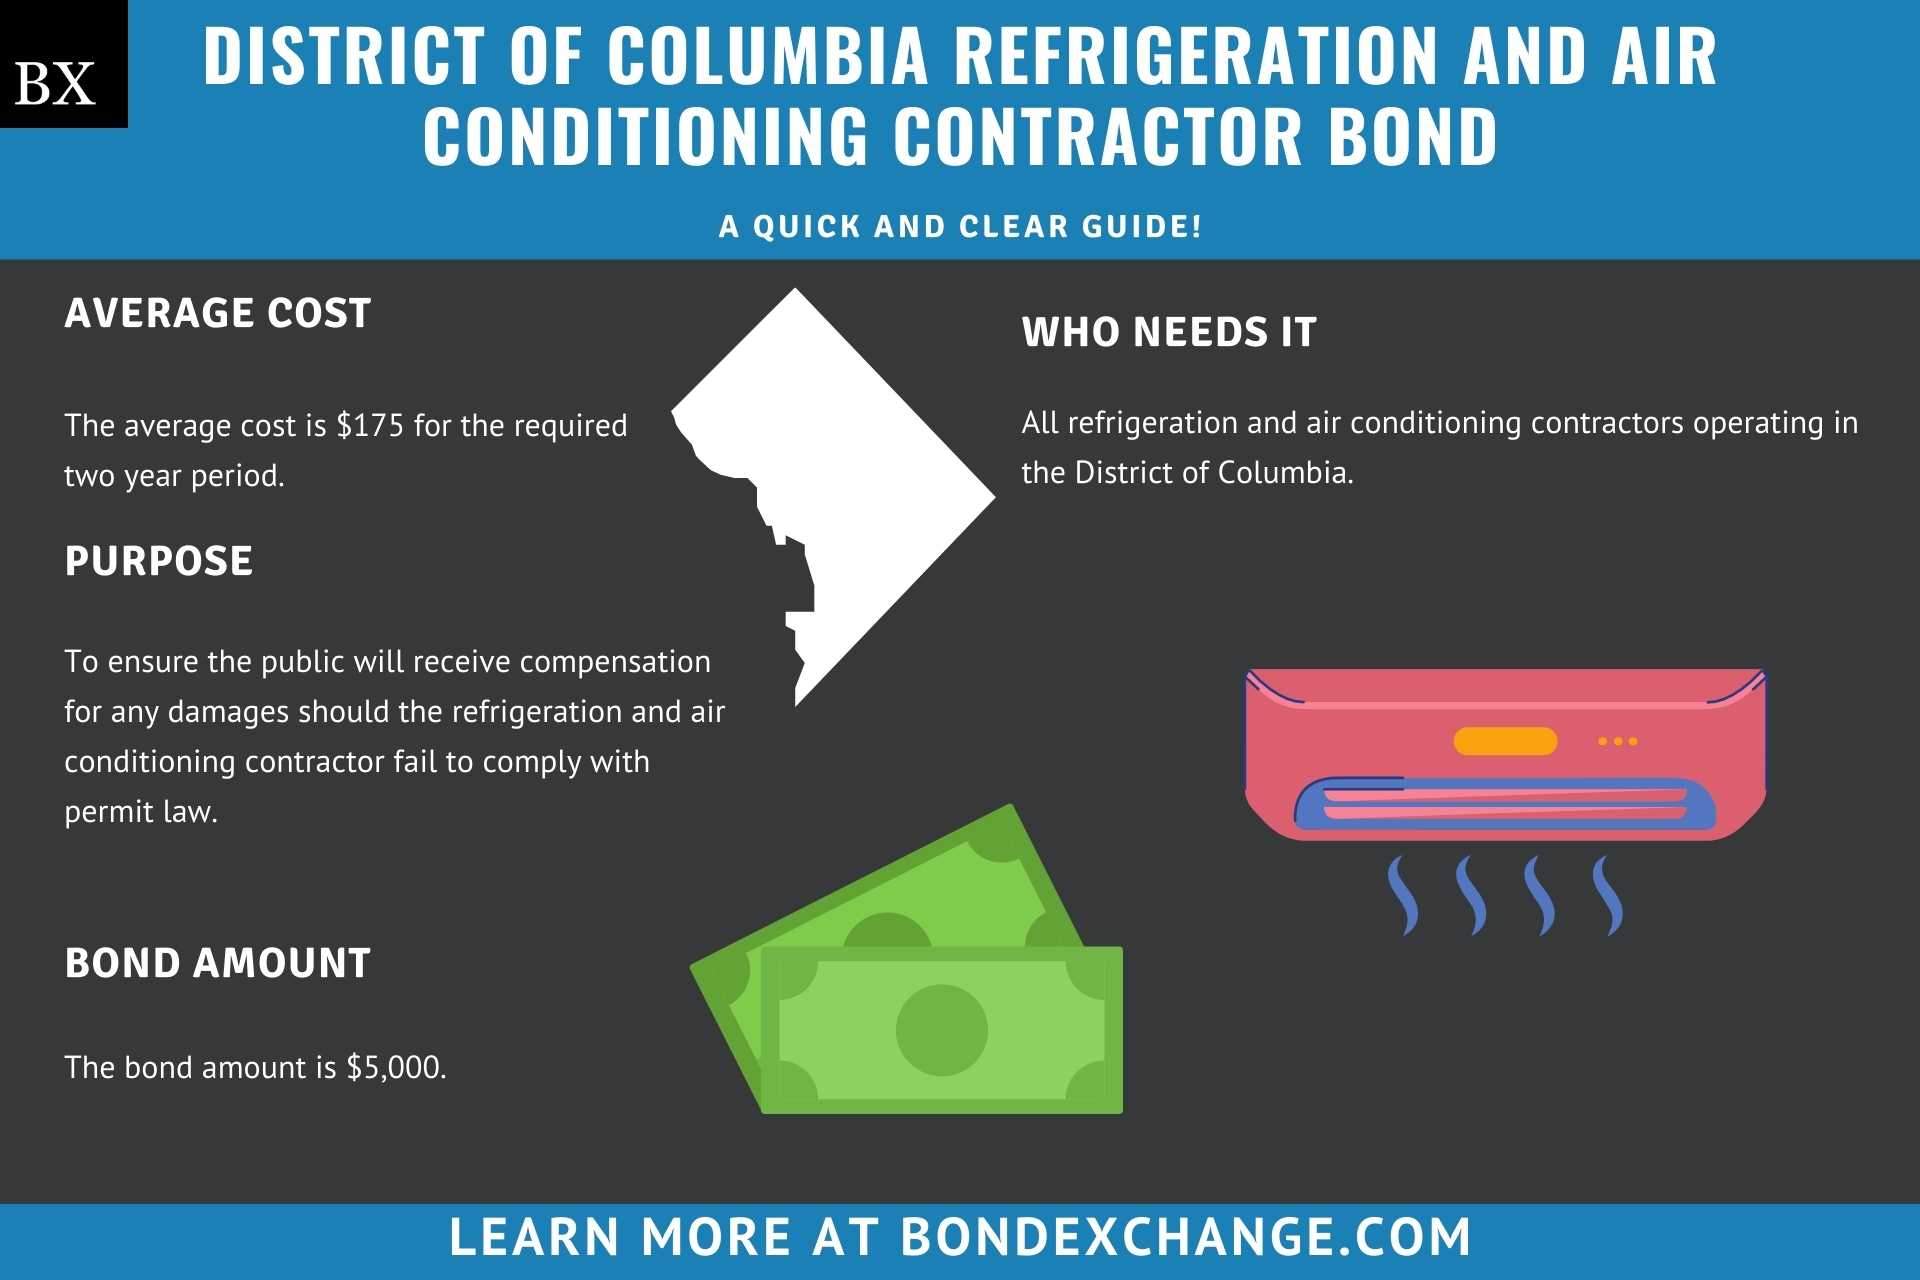 District of Columbia Refrigeration and Air Conditioning Contractor Bond